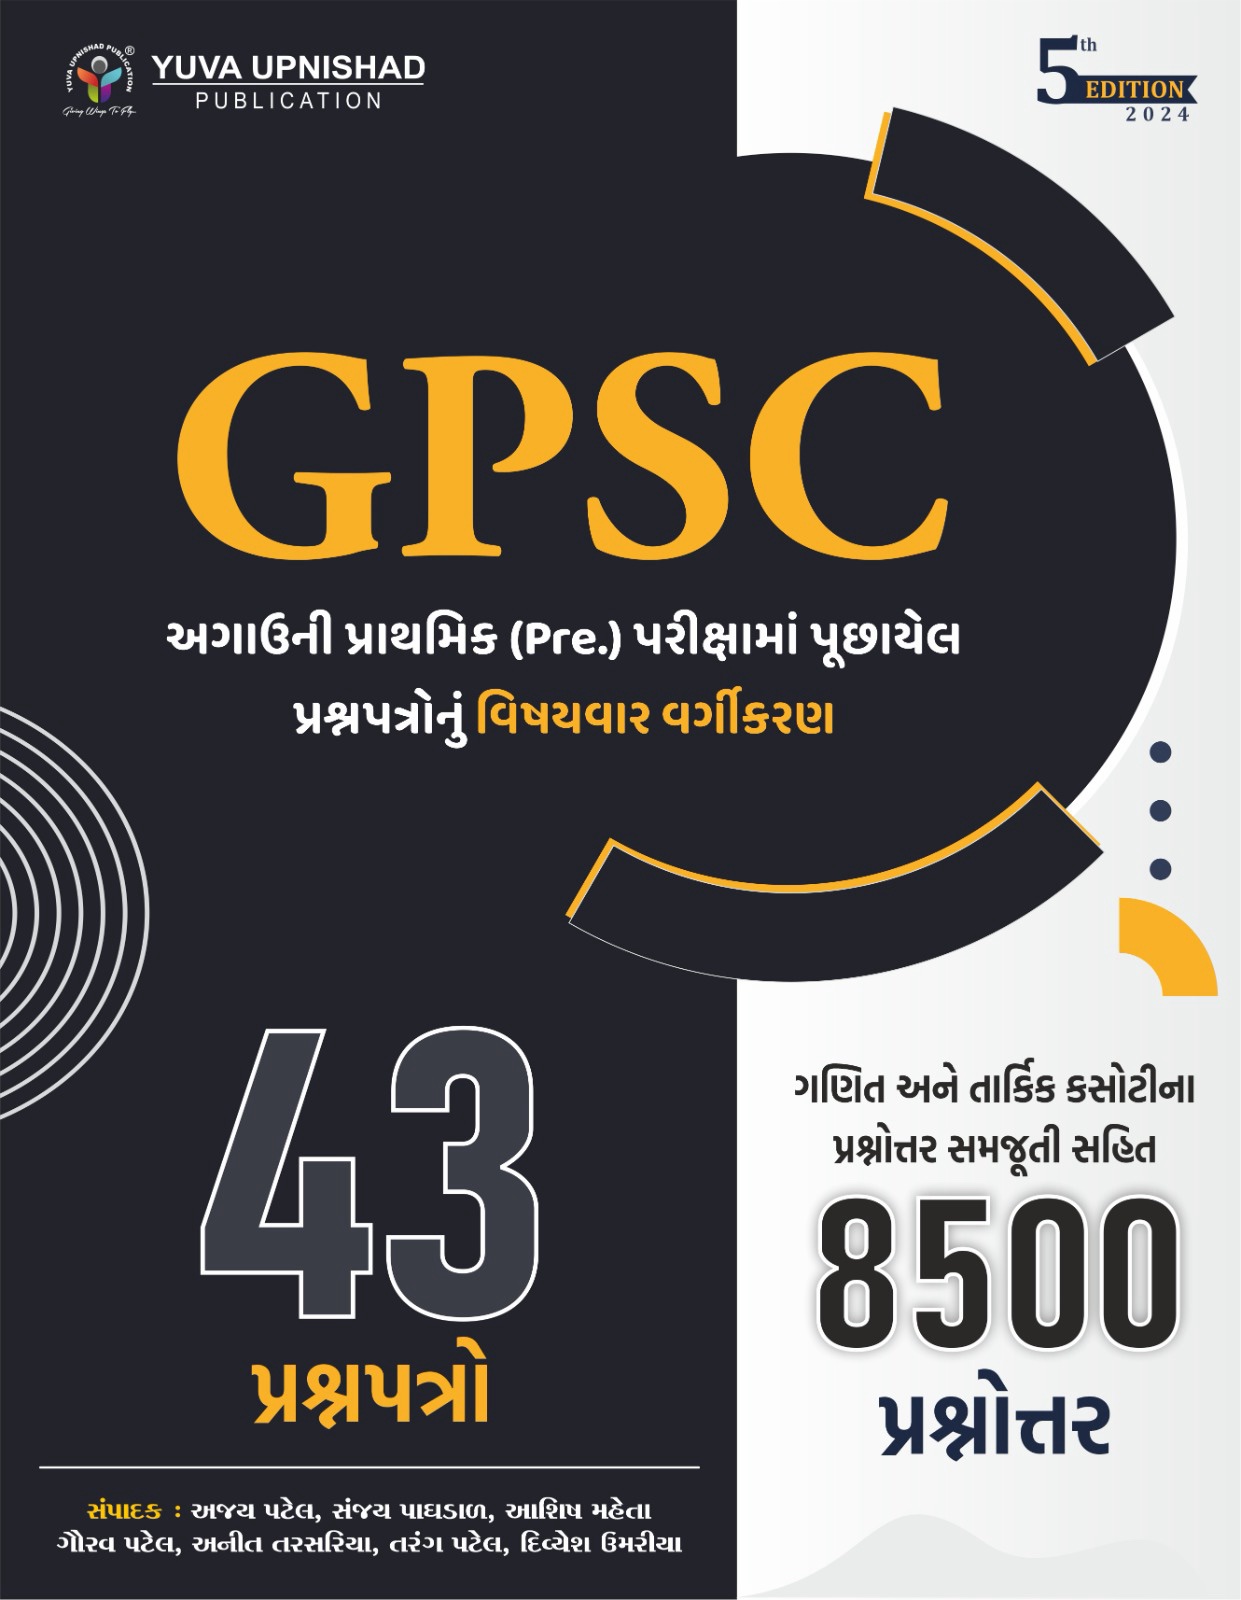 Gpsc 43 Paperset 8500 Questions/ Gpsc Paperset Yuva Upnishad 5th Edition